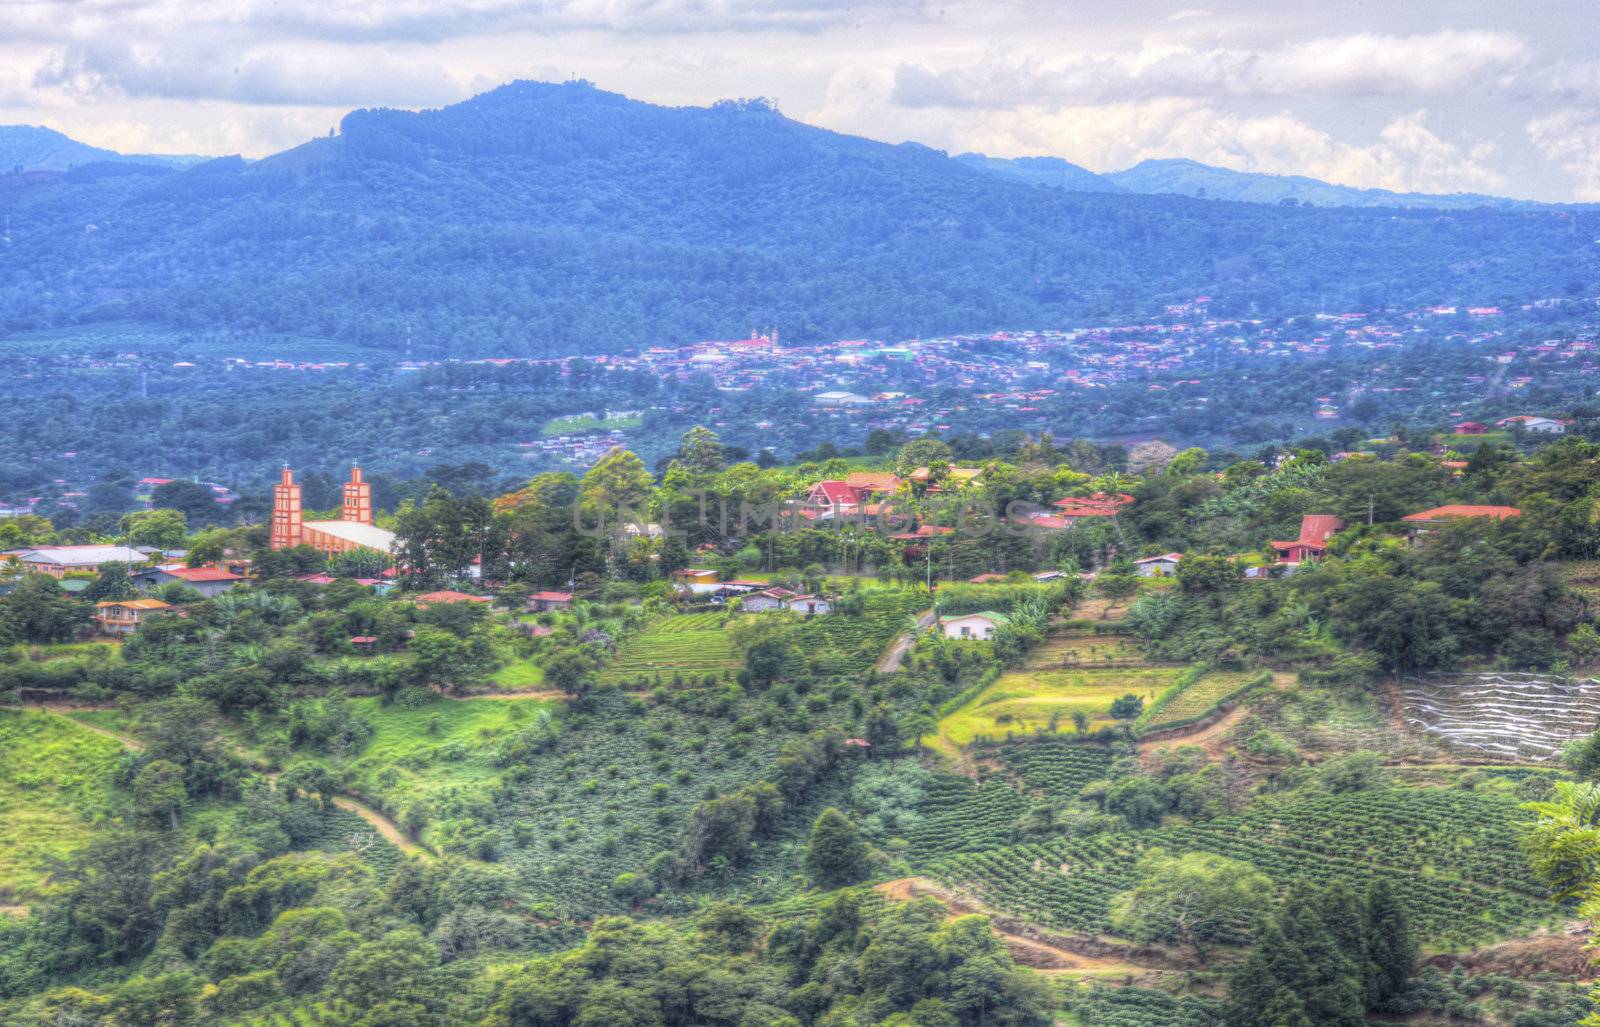 Costa Rican landscape featuring coffee fields and a quaint church in the background.